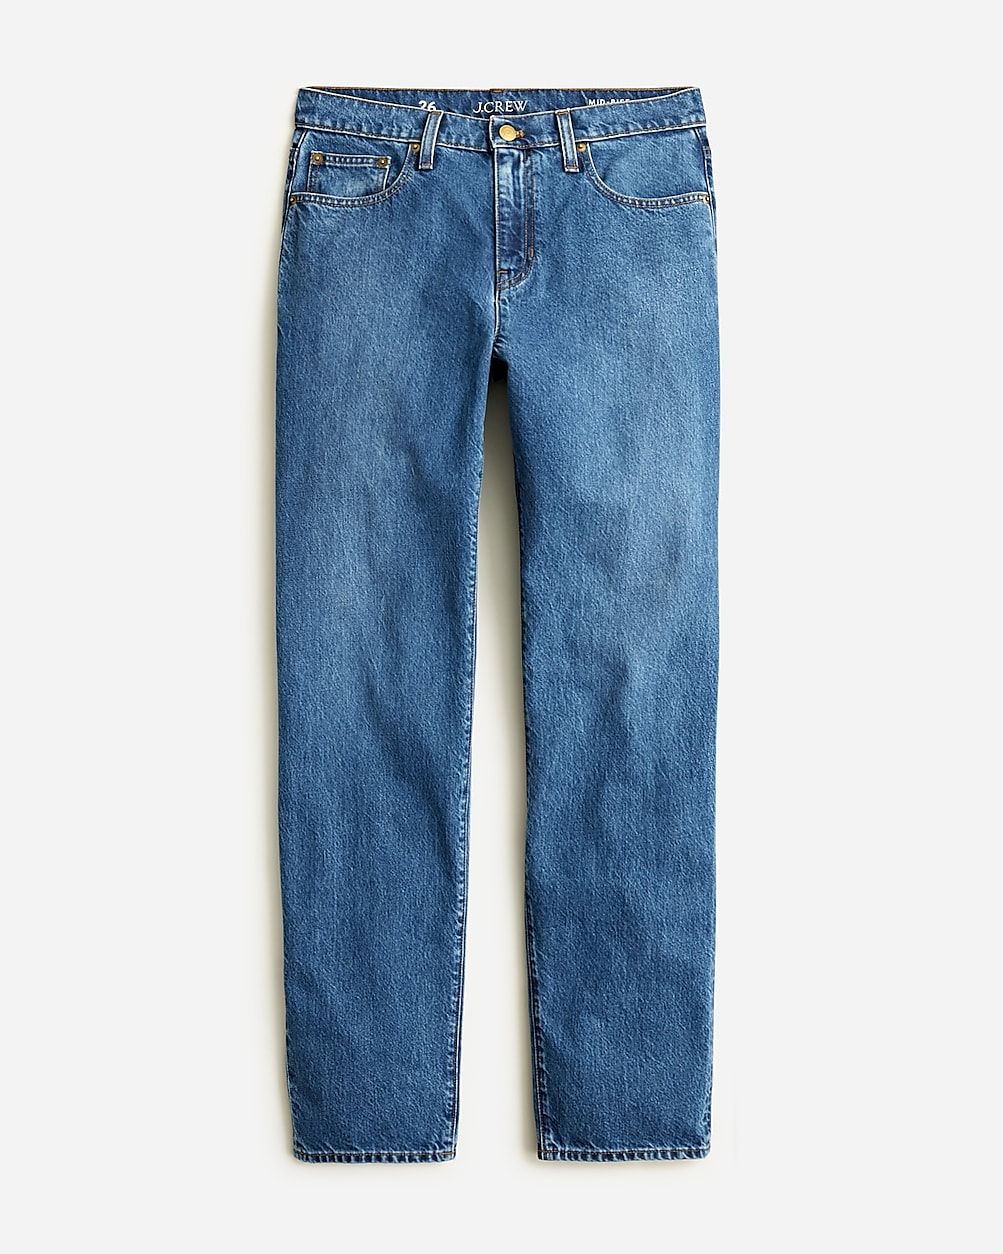 Petite slouchy-straight jean in Turney wash | J.Crew US